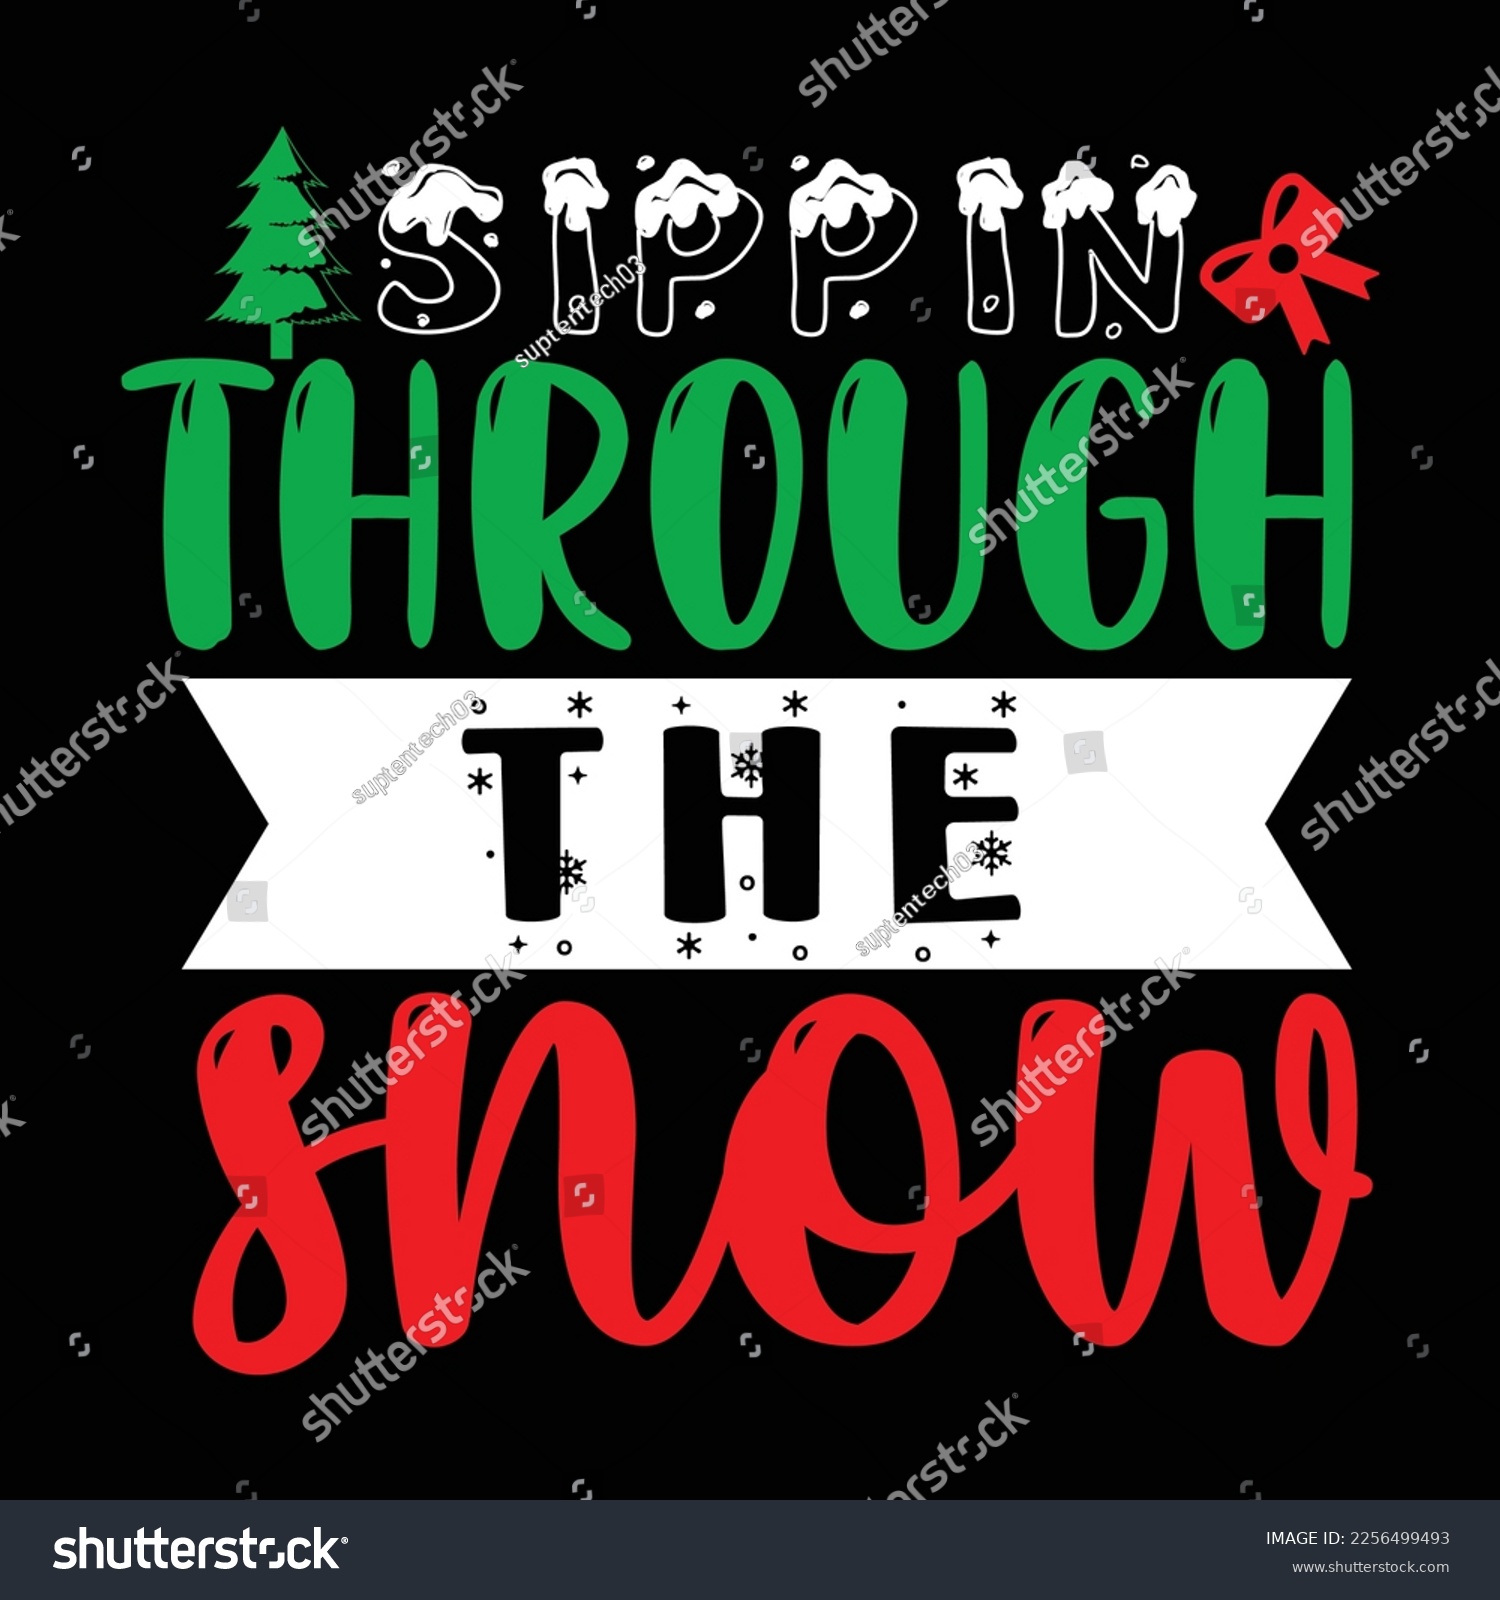 SVG of Through The Show, Merry Christmas shirts Print Template, Xmas Ugly Snow Santa Clouse New Year Holiday Candy Santa Hat vector illustration for Christmas hand lettered svg